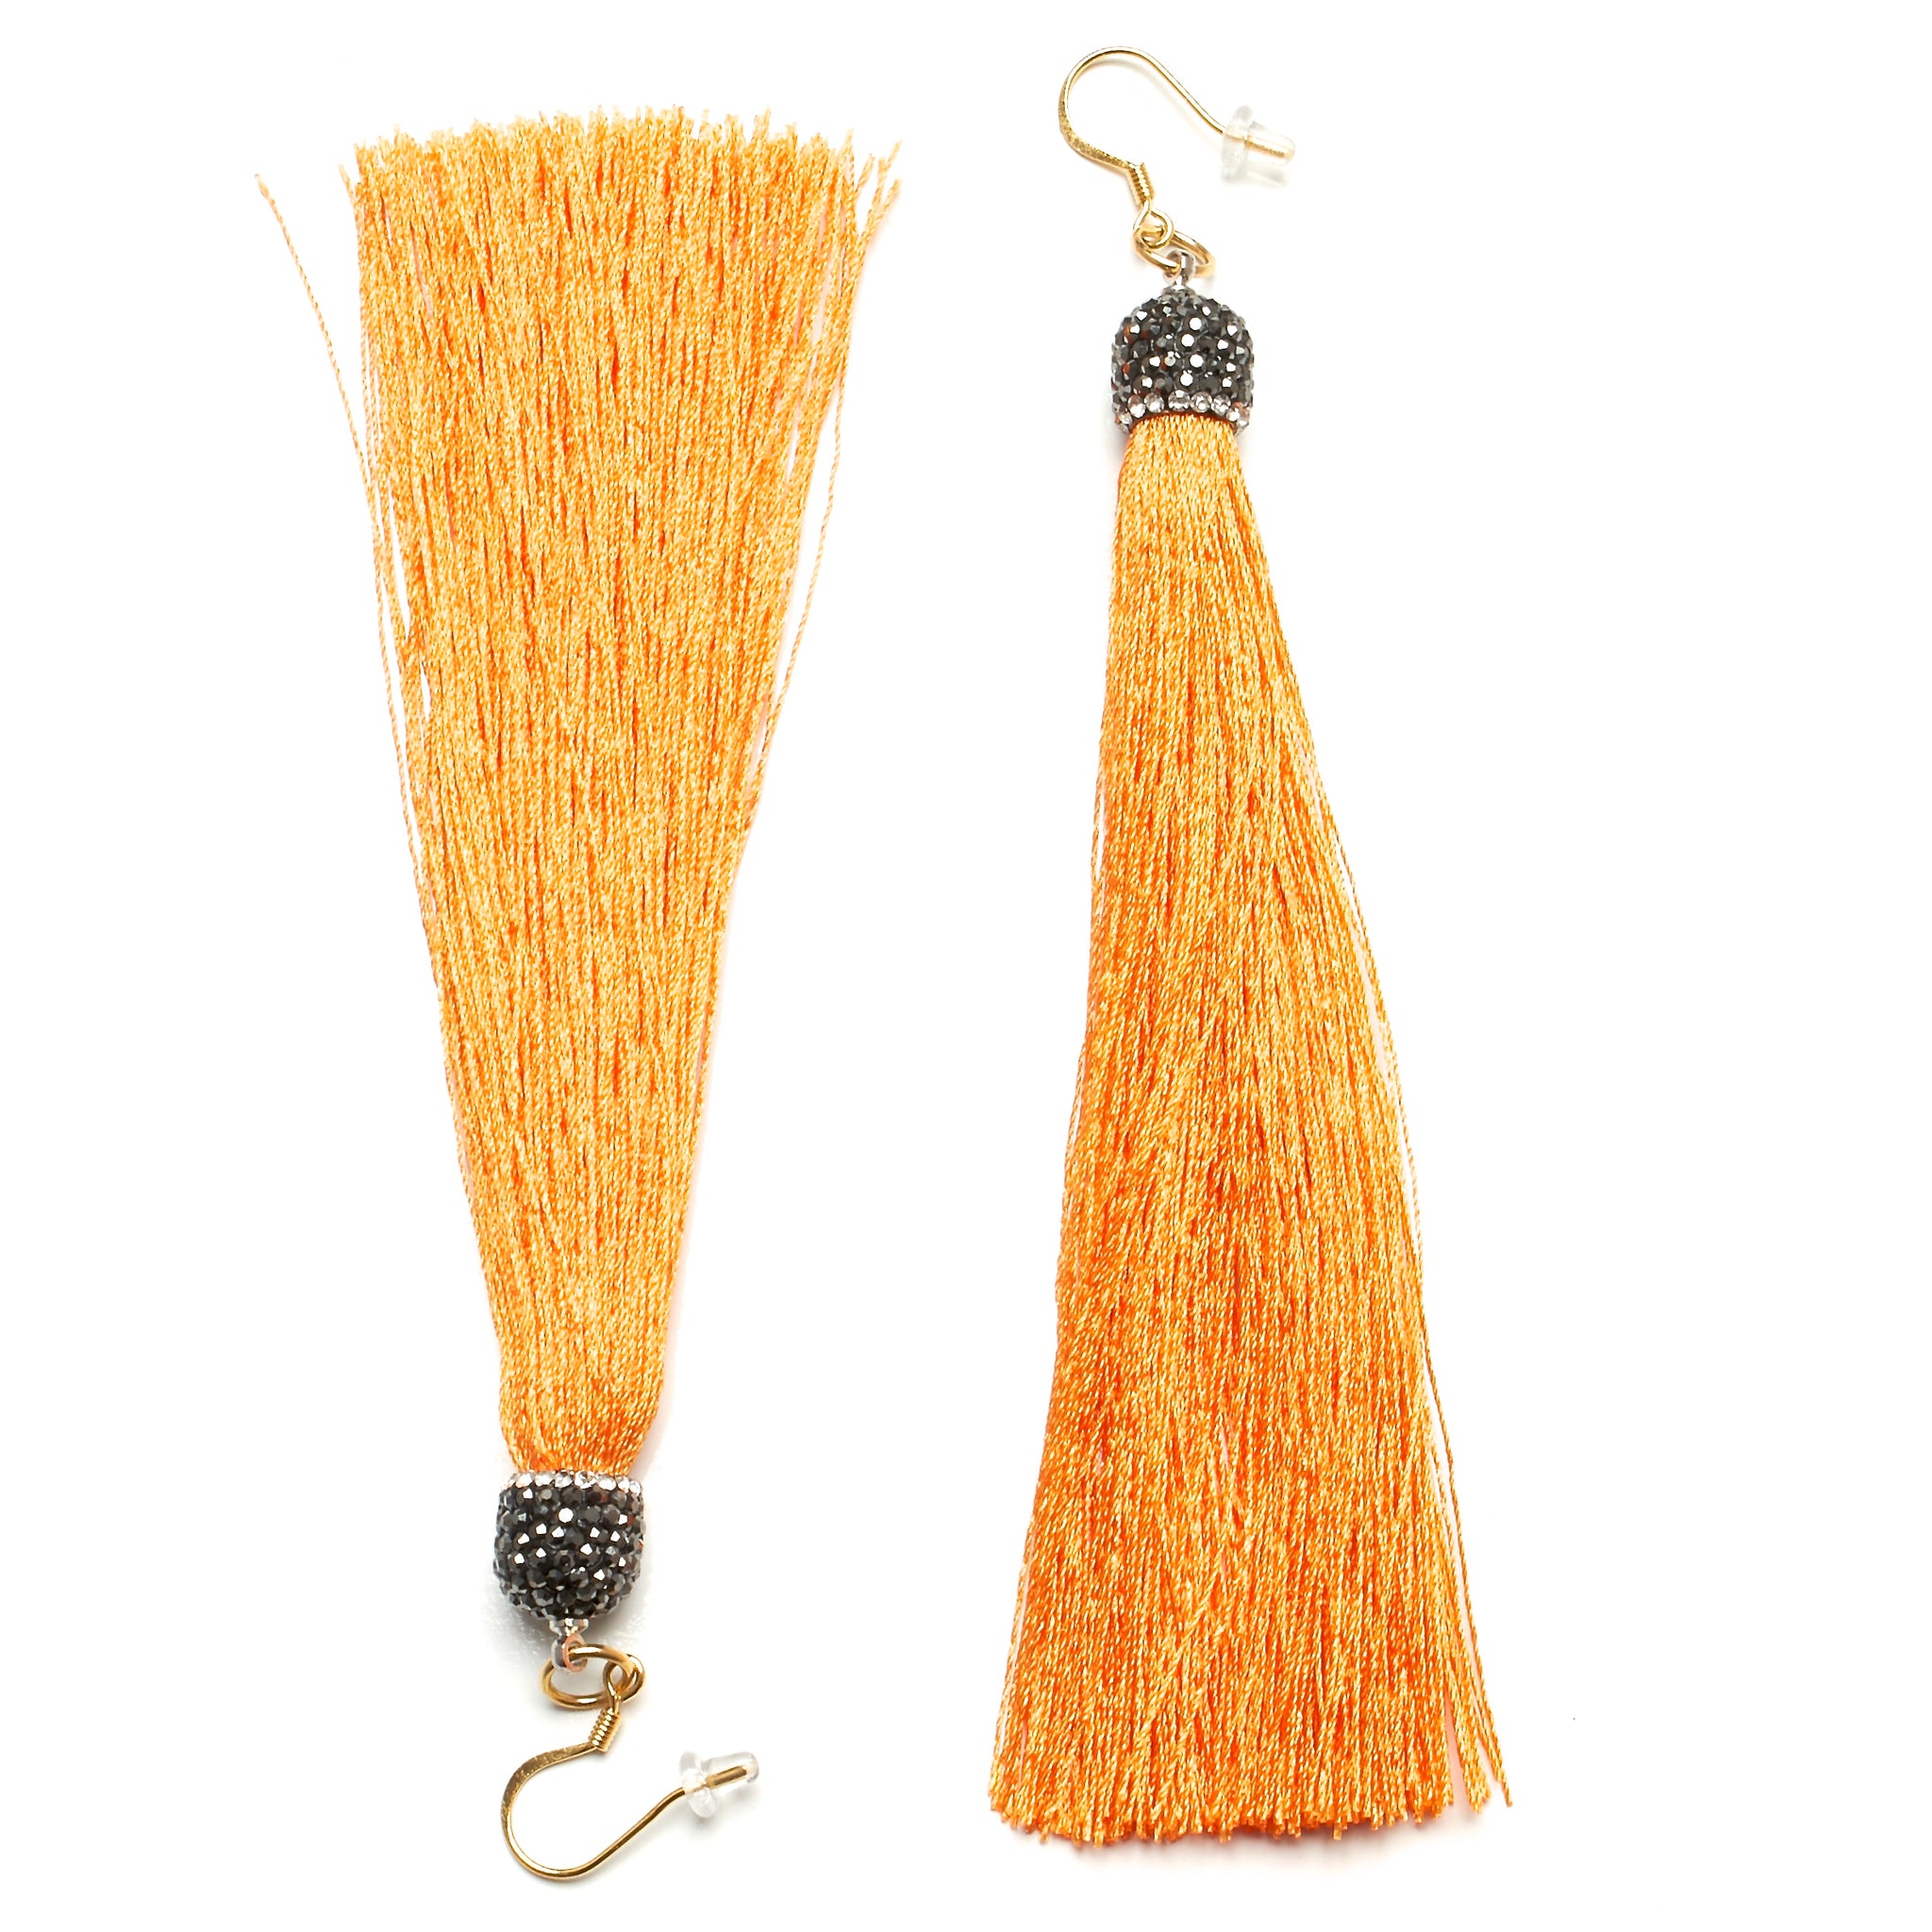 SILK TASSEL AND PAVE RHINESTONES EARRINGS by nyet jewelry